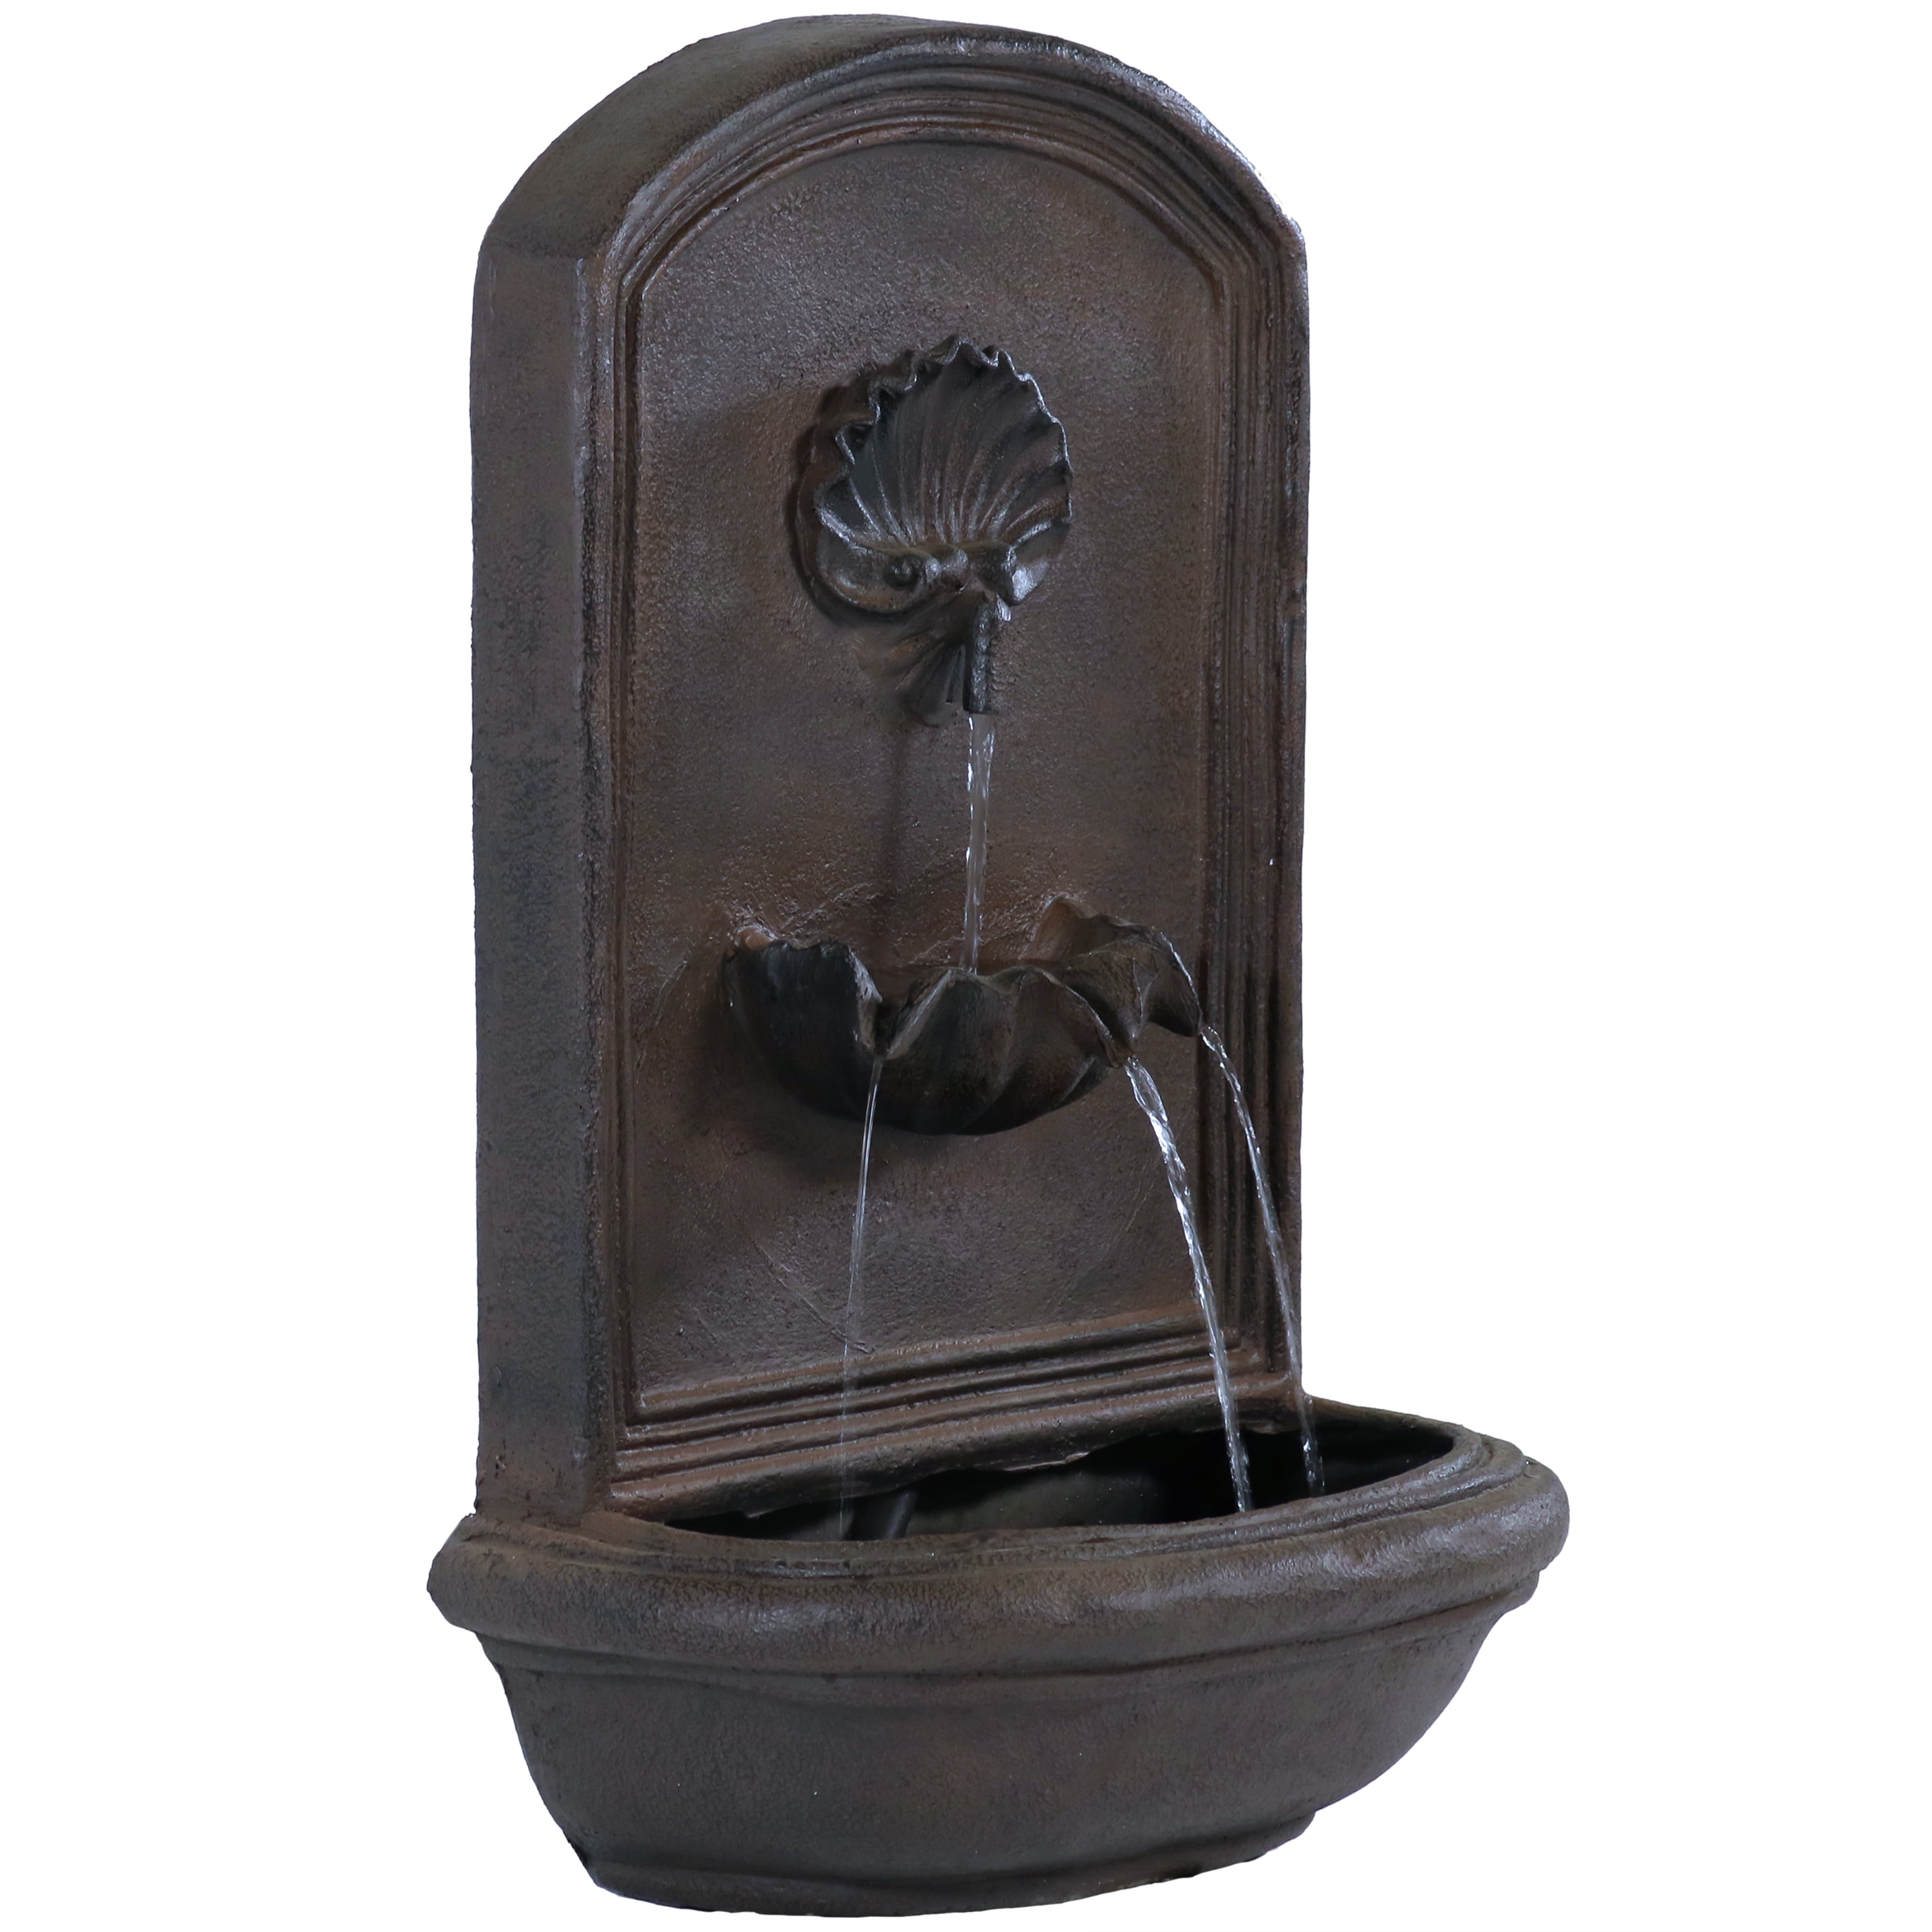 Sunnydaze Seaside Outdoor Wall Fountain With Lead Finish 27 Inch Tall for sale online 